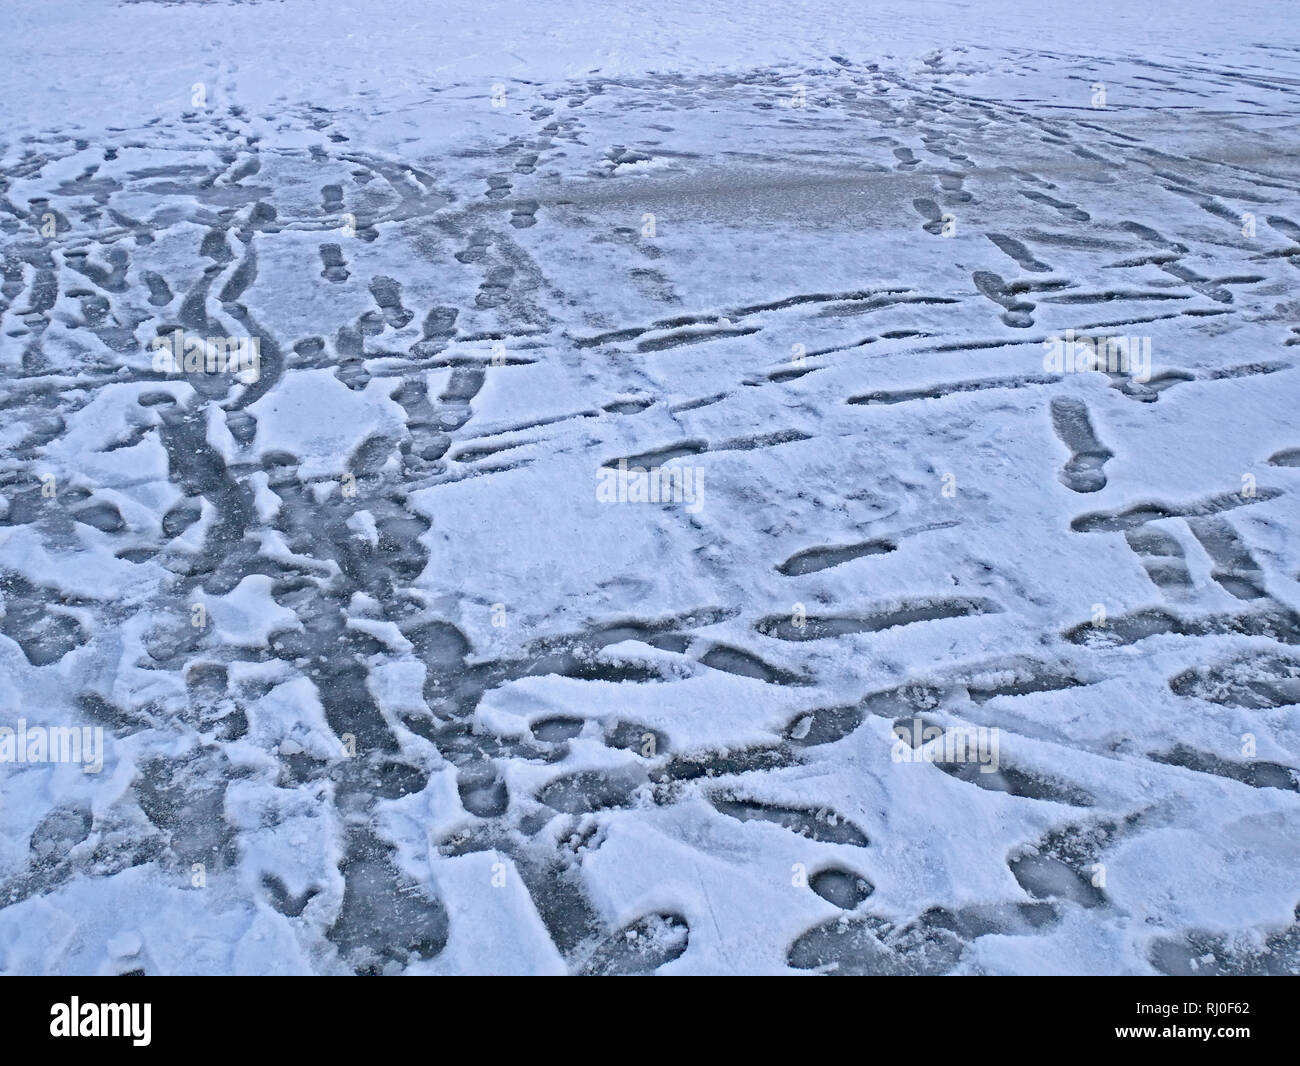 Frozen surface of lake in winter with many human footprints Stock Photo